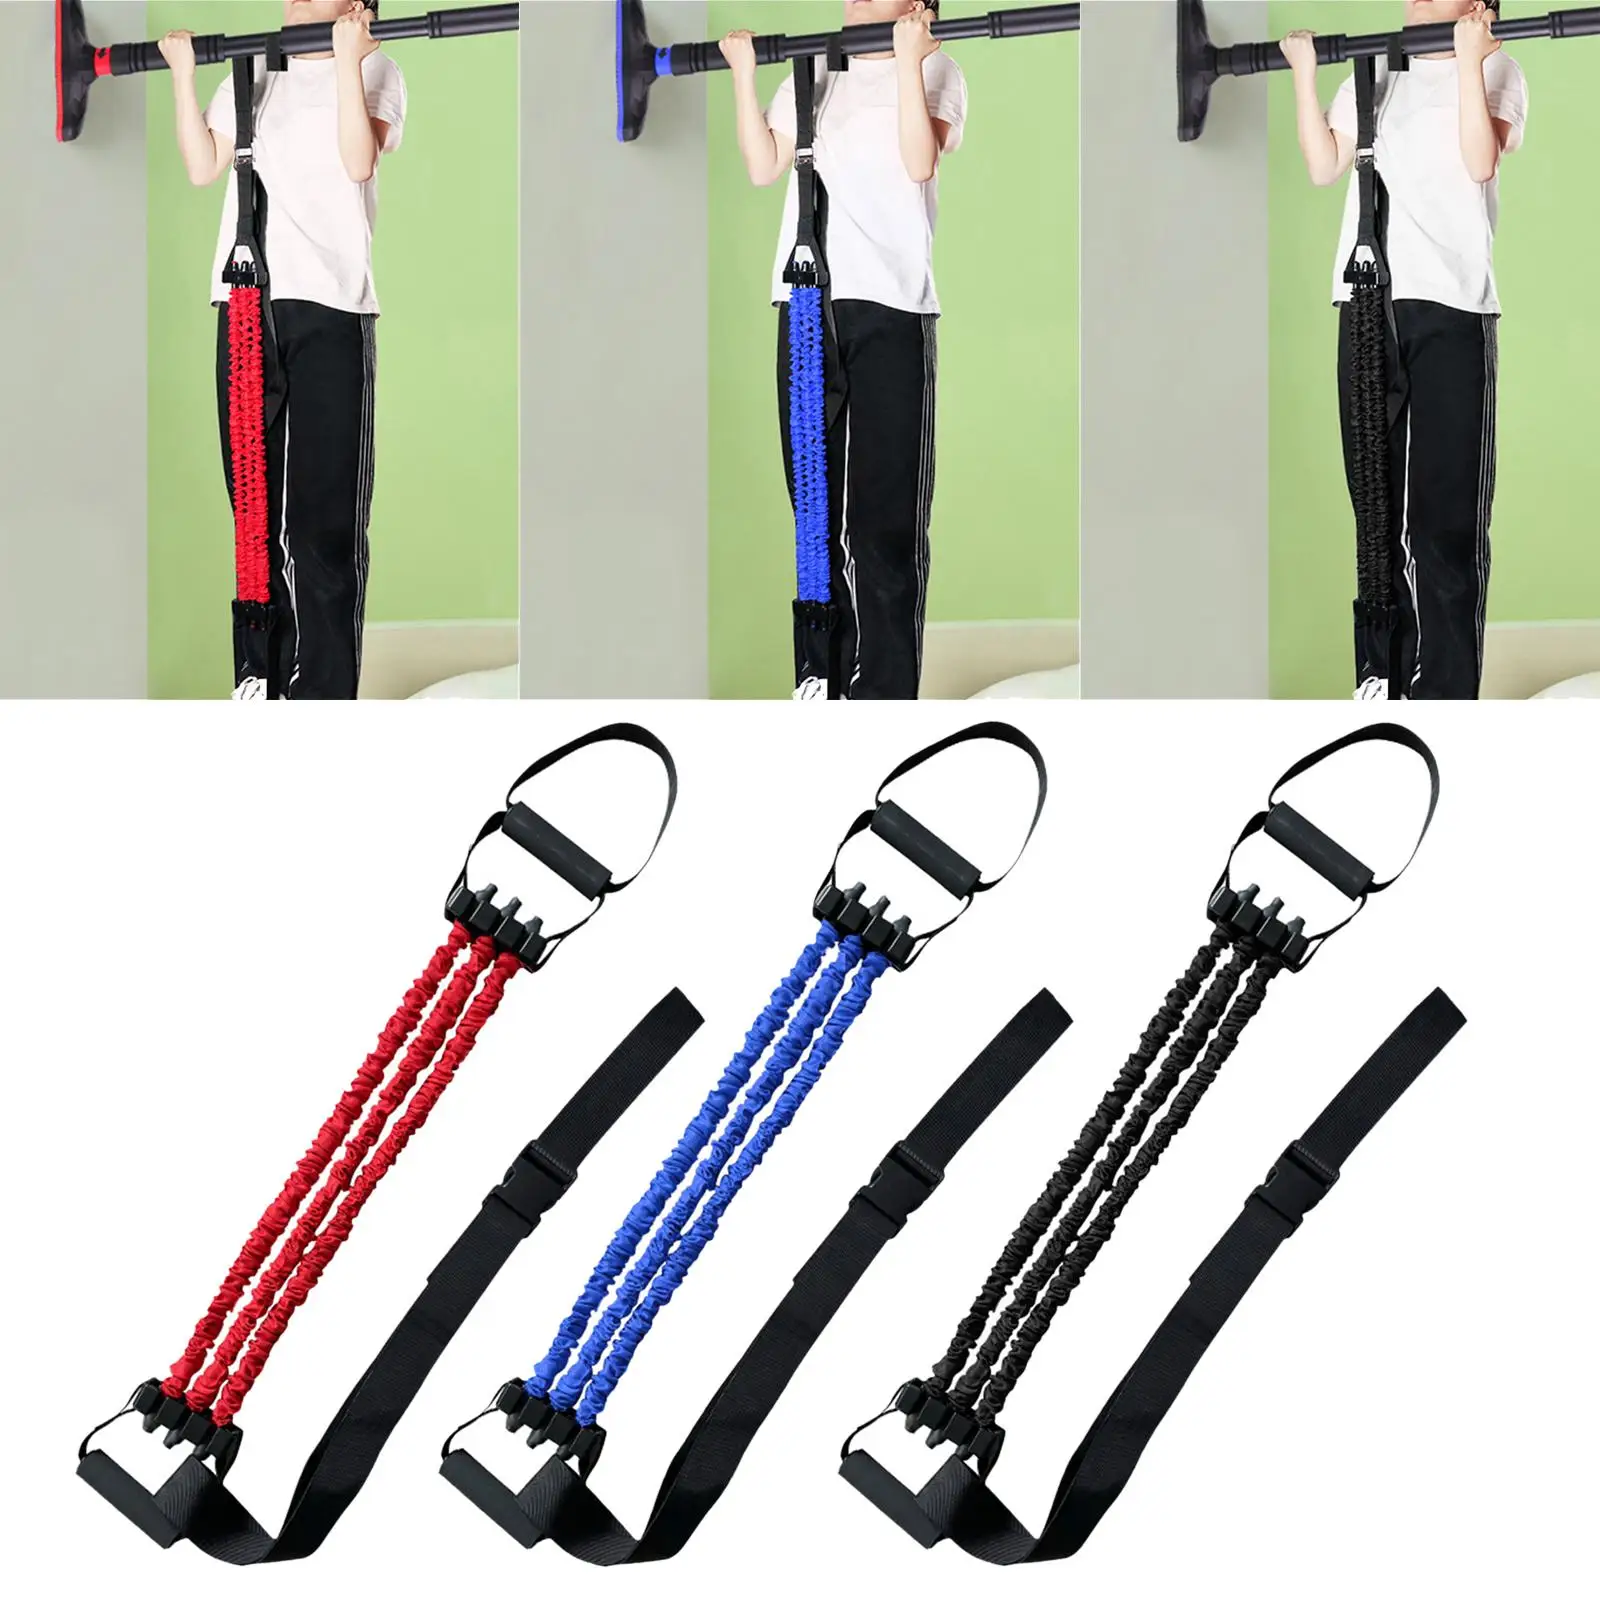 Premium pullassist band Heavy duty adjustable resistance bands to improve